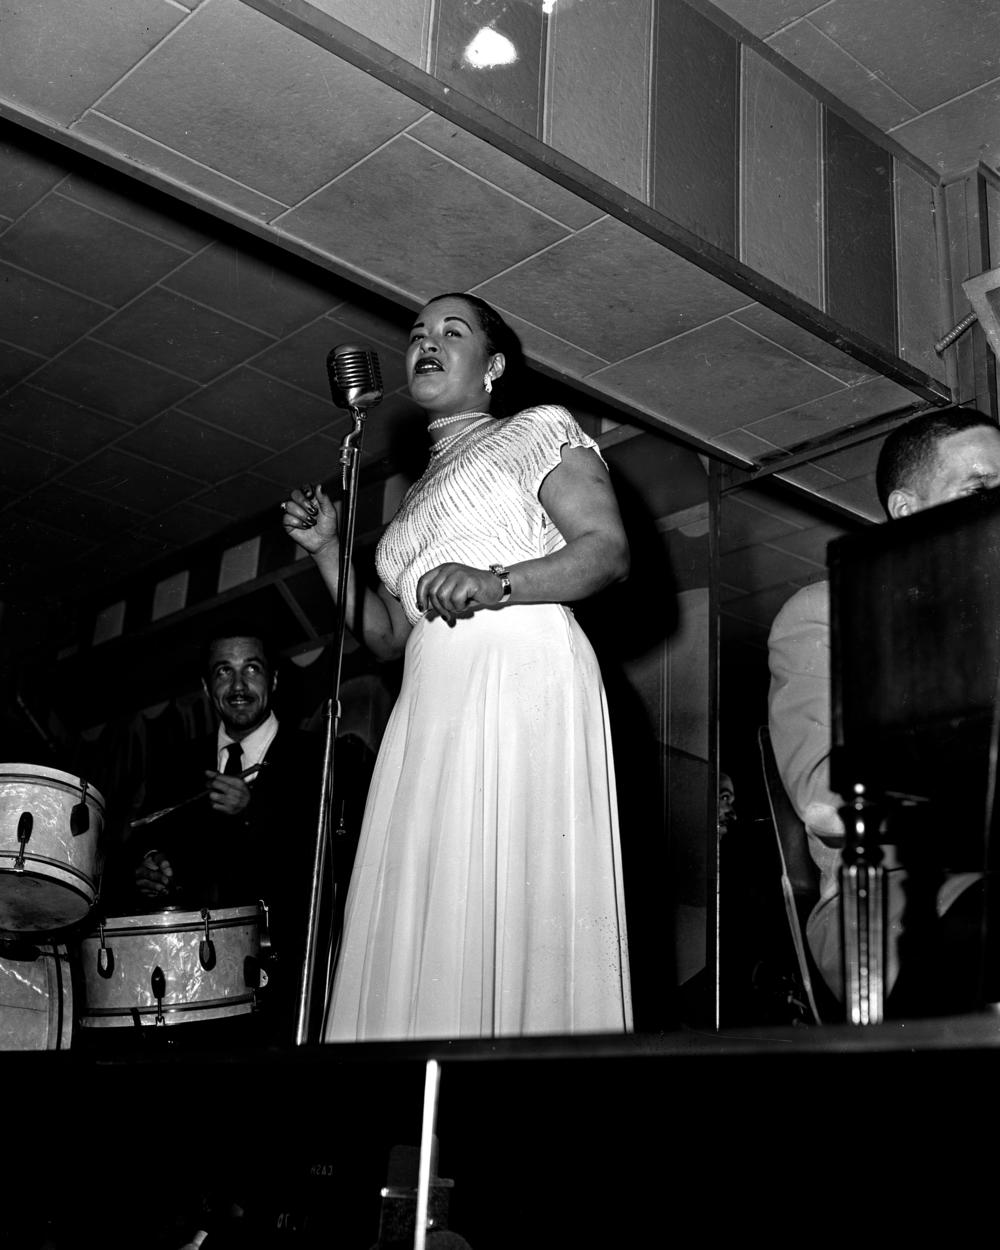 Billie Holiday singing with a band.